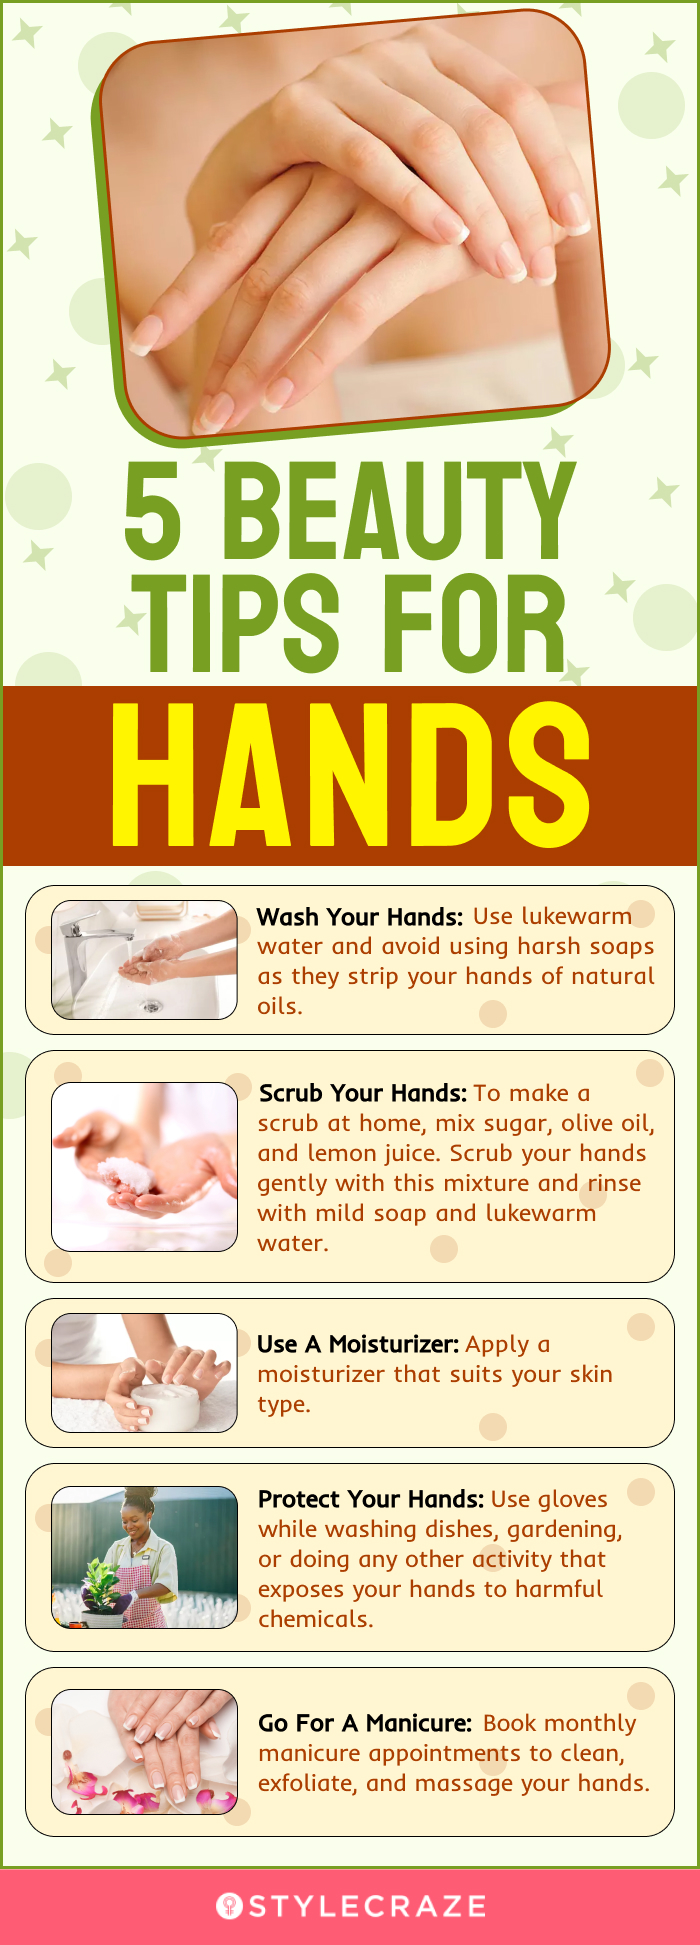 5 beauty tips for hands [infographic]